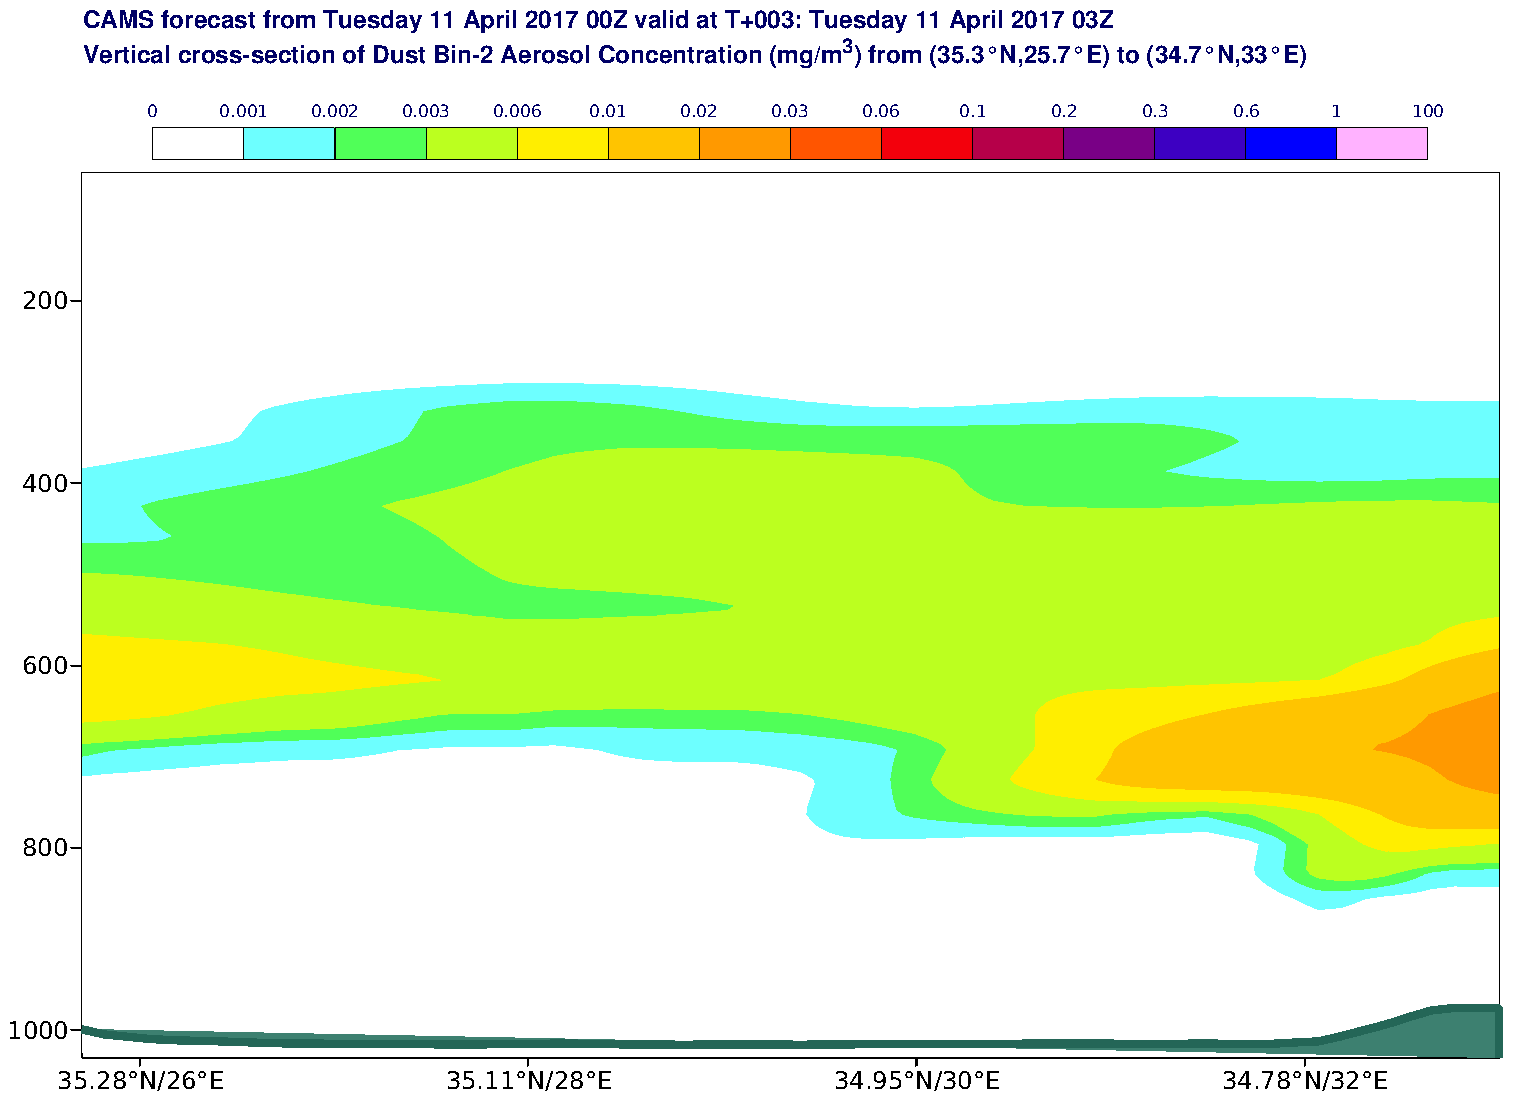 Vertical cross-section of Dust Bin-2 Aerosol Concentration (mg/m3) valid at T3 - 2017-04-11 03:00